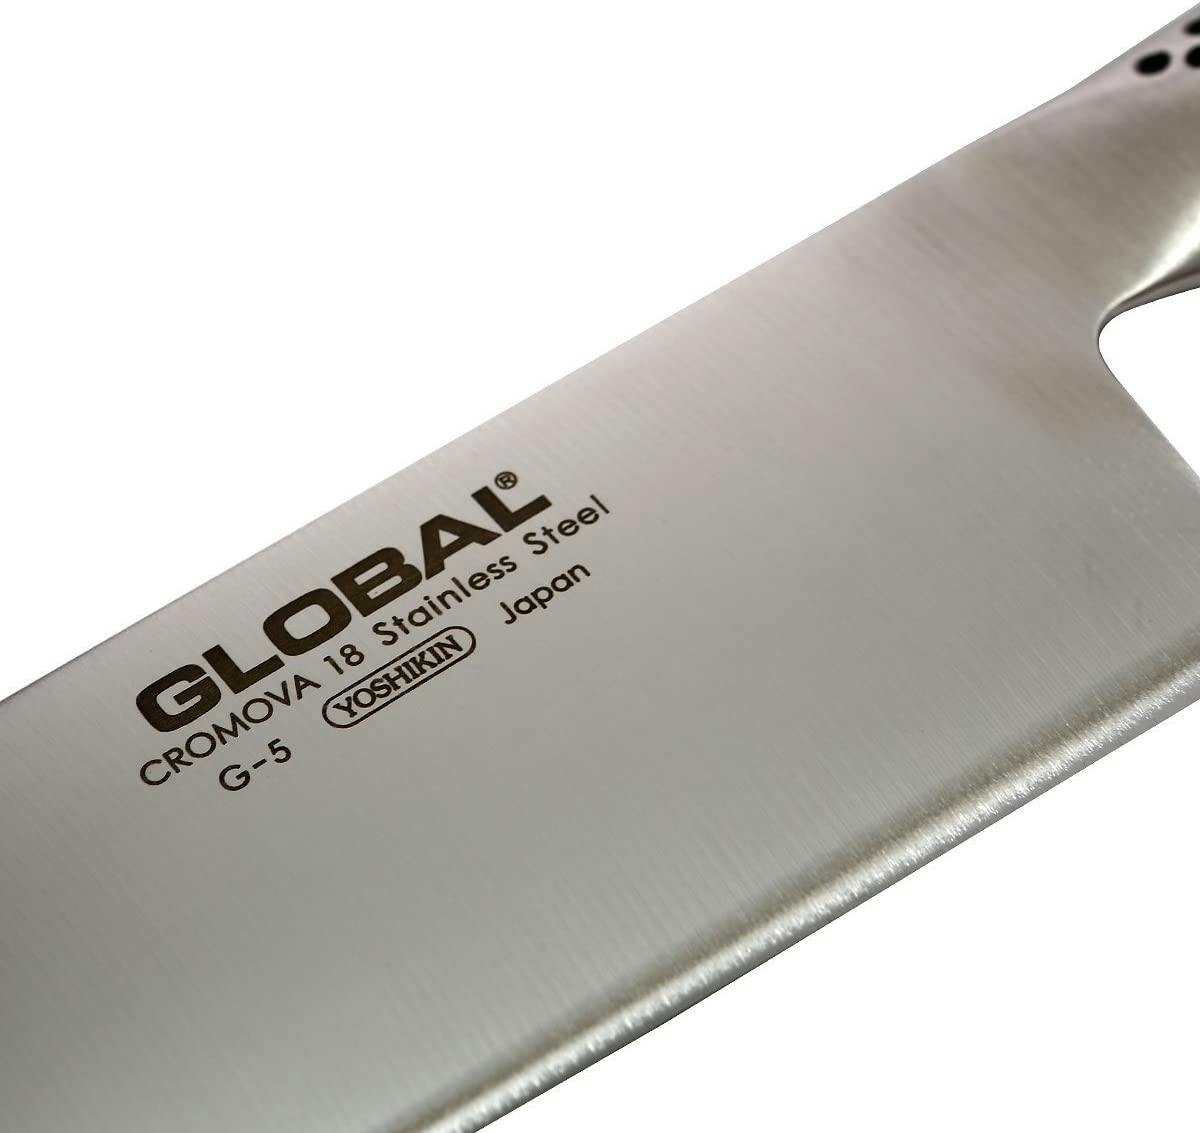 Global Classic 7 Hollow Ground Vegetable Knife